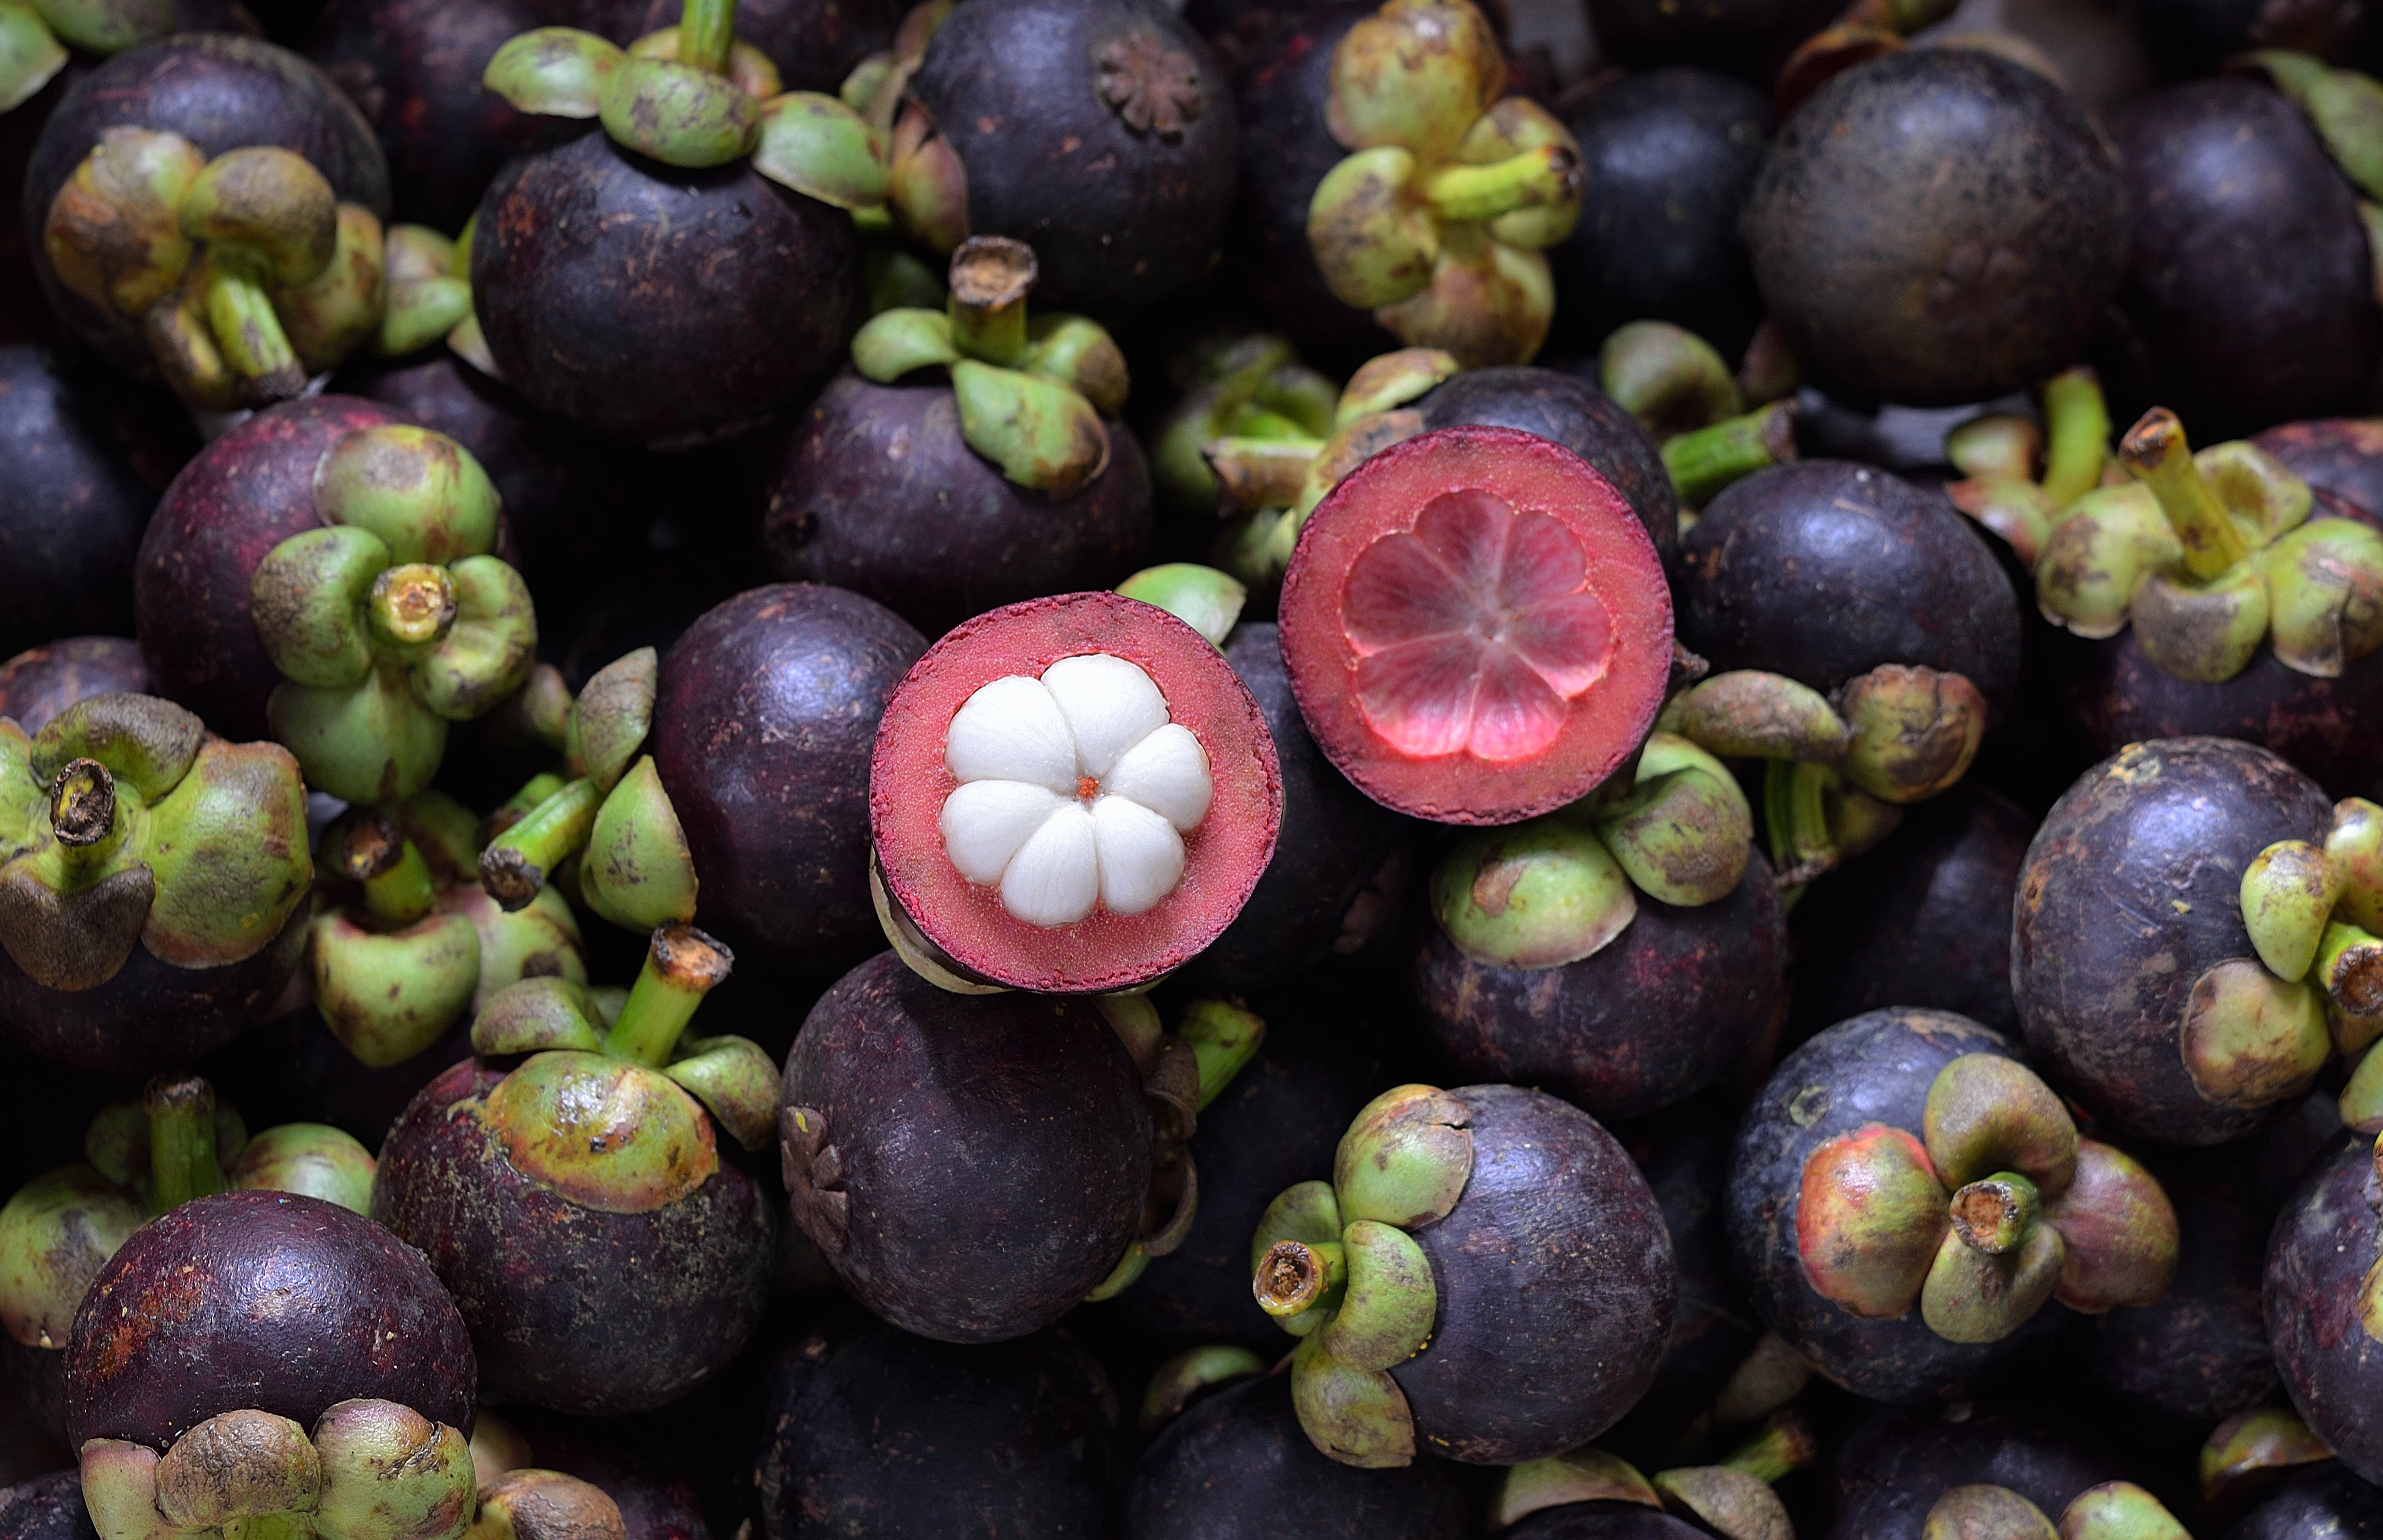 Datassential features mangosteen, yuzu and mamey sapote in its tropical fruits list to watch for 2019.